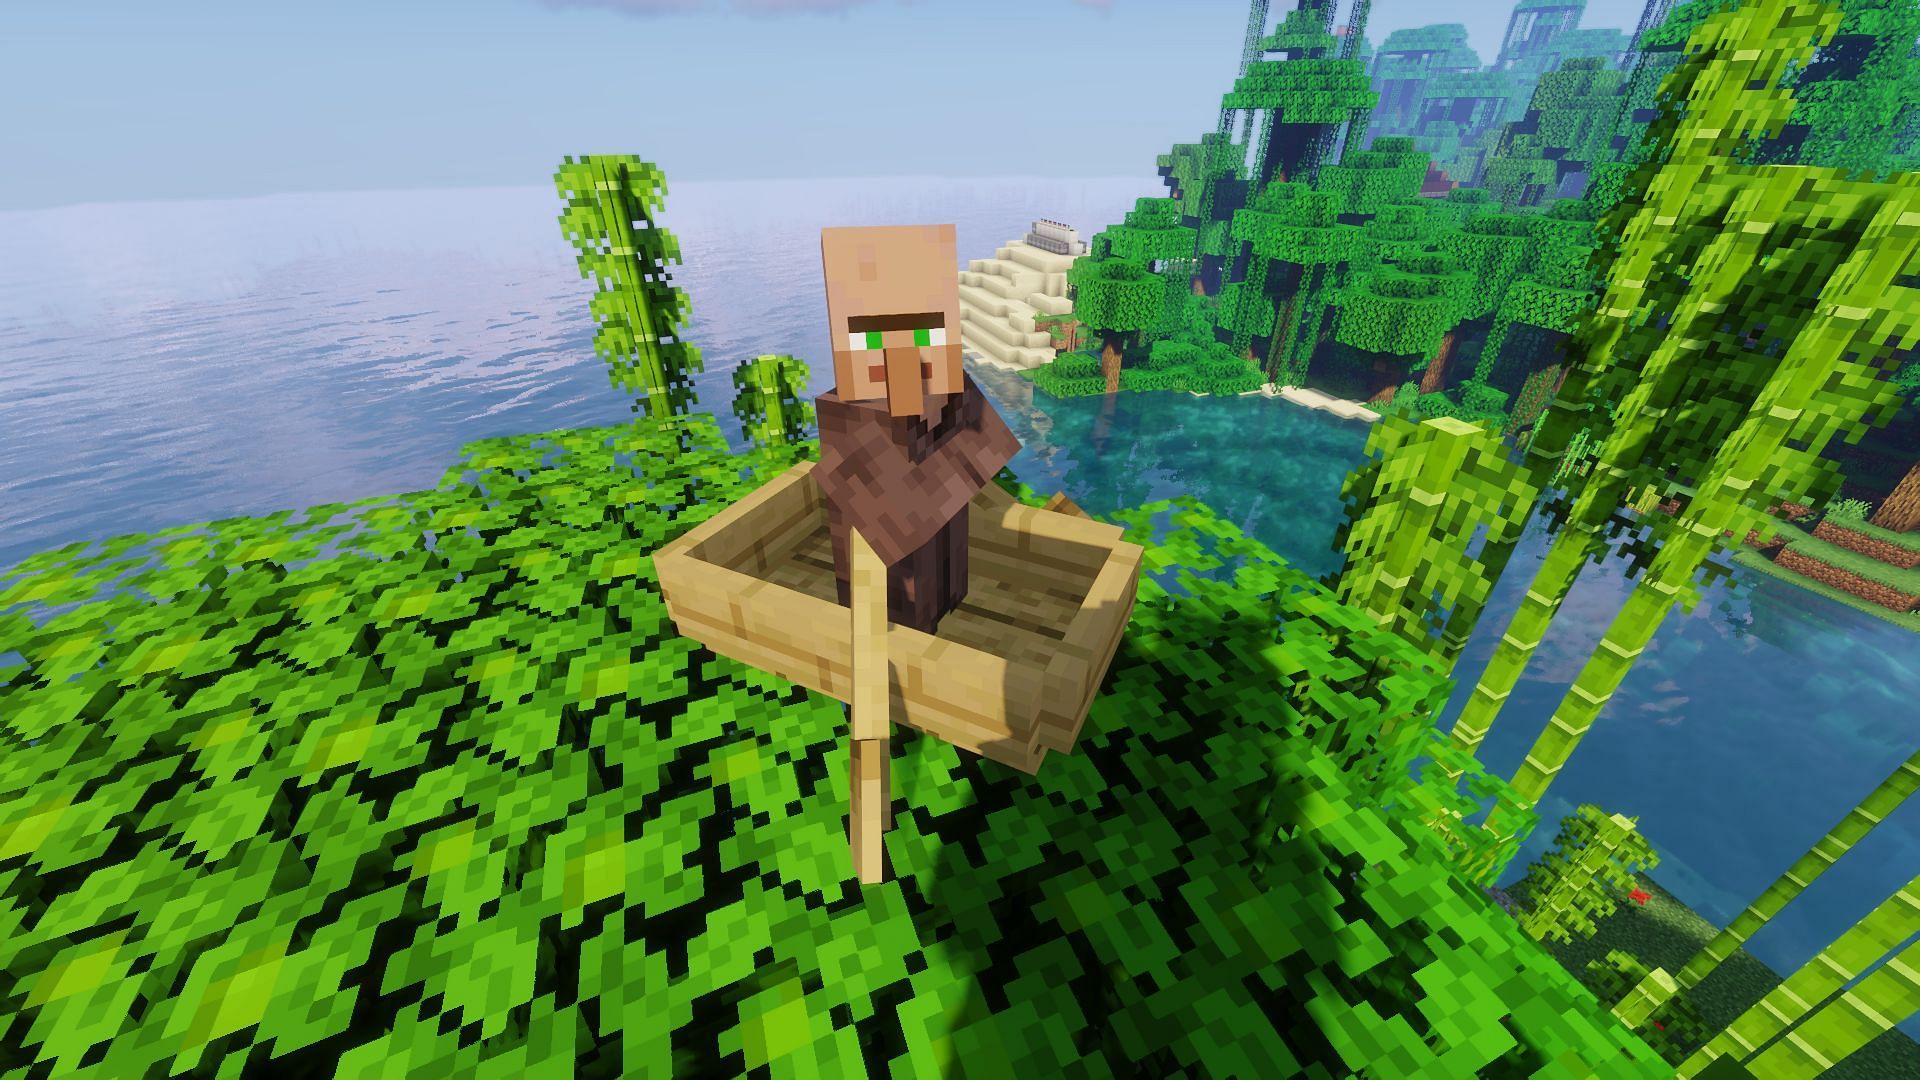 An example of a villager on a boat (Image via Minecraft)